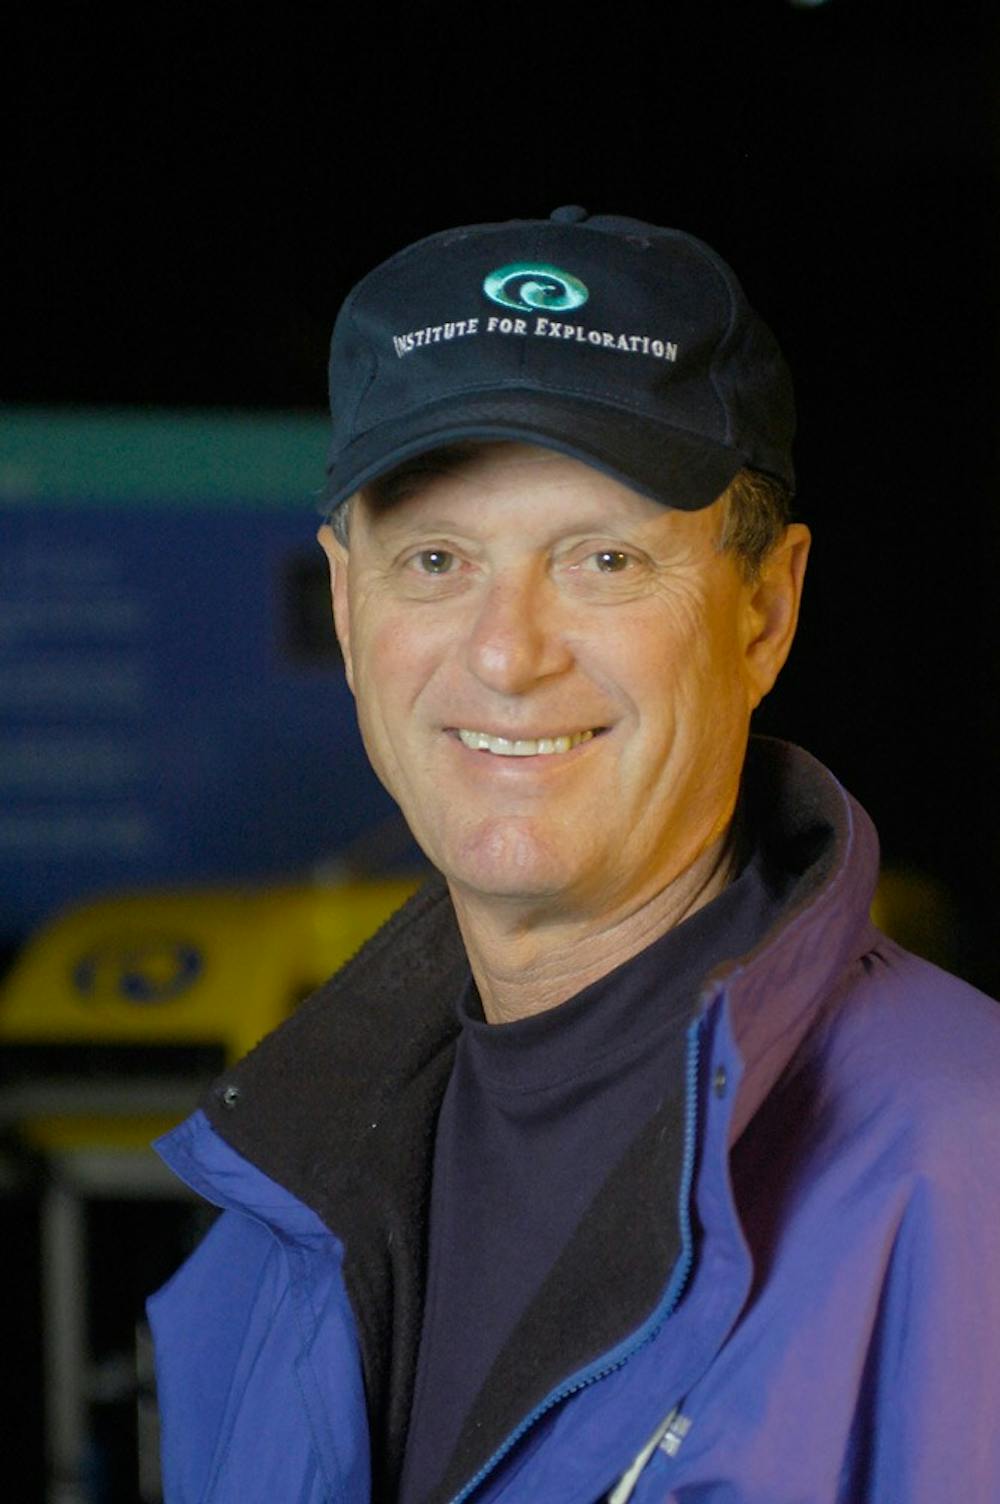 <p>Robert Ballard will be discussing deep-sea exploration at Alumni Arena on April 1. Ballard is a professor of oceanography at the University of Rhode Island and helped discover the RMS Titanic in 1985.</p>